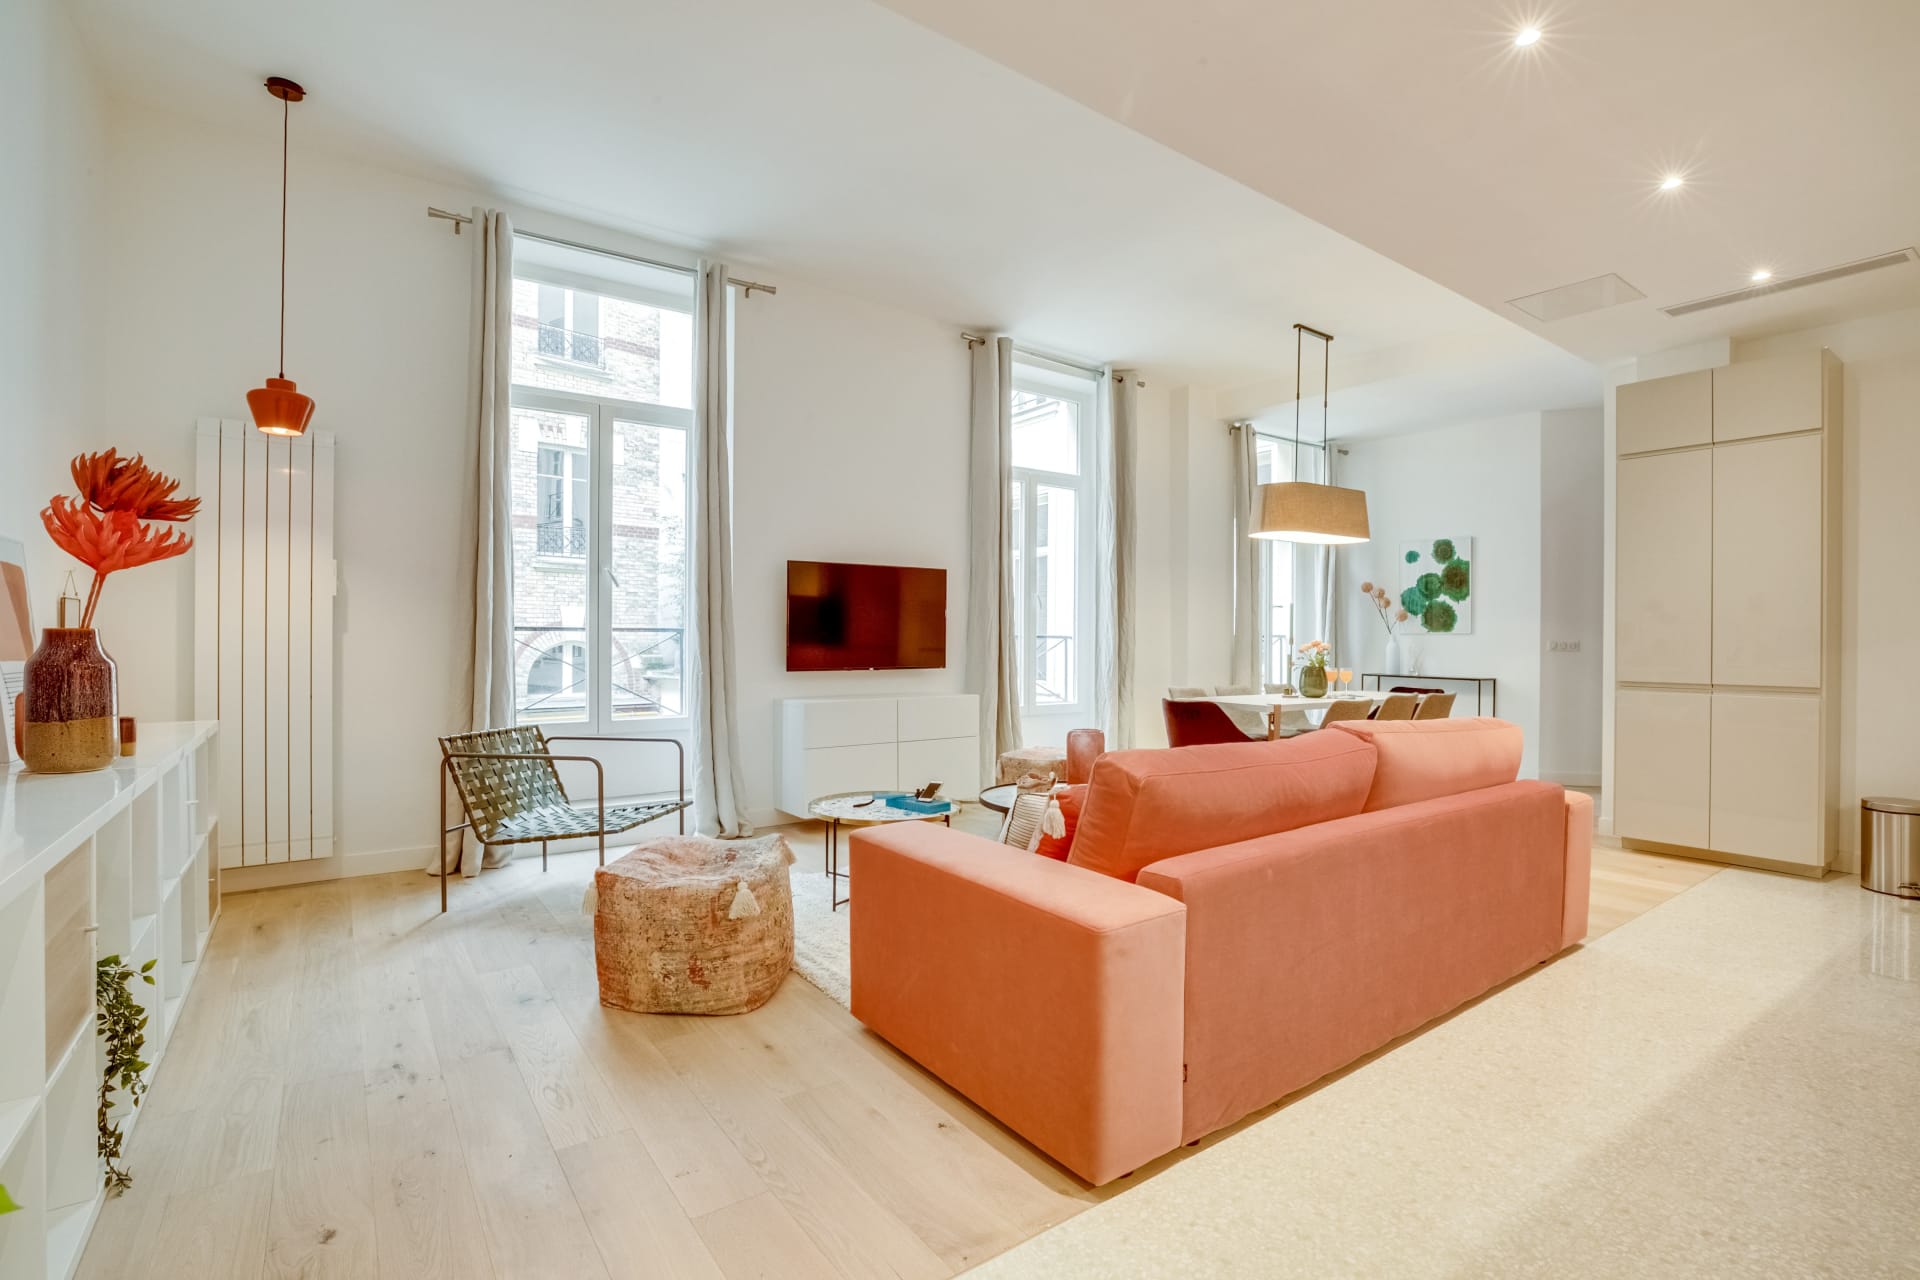 Property Image 2 - Stylish Three Bedroom apartment in the neighbourhood of Le Marais